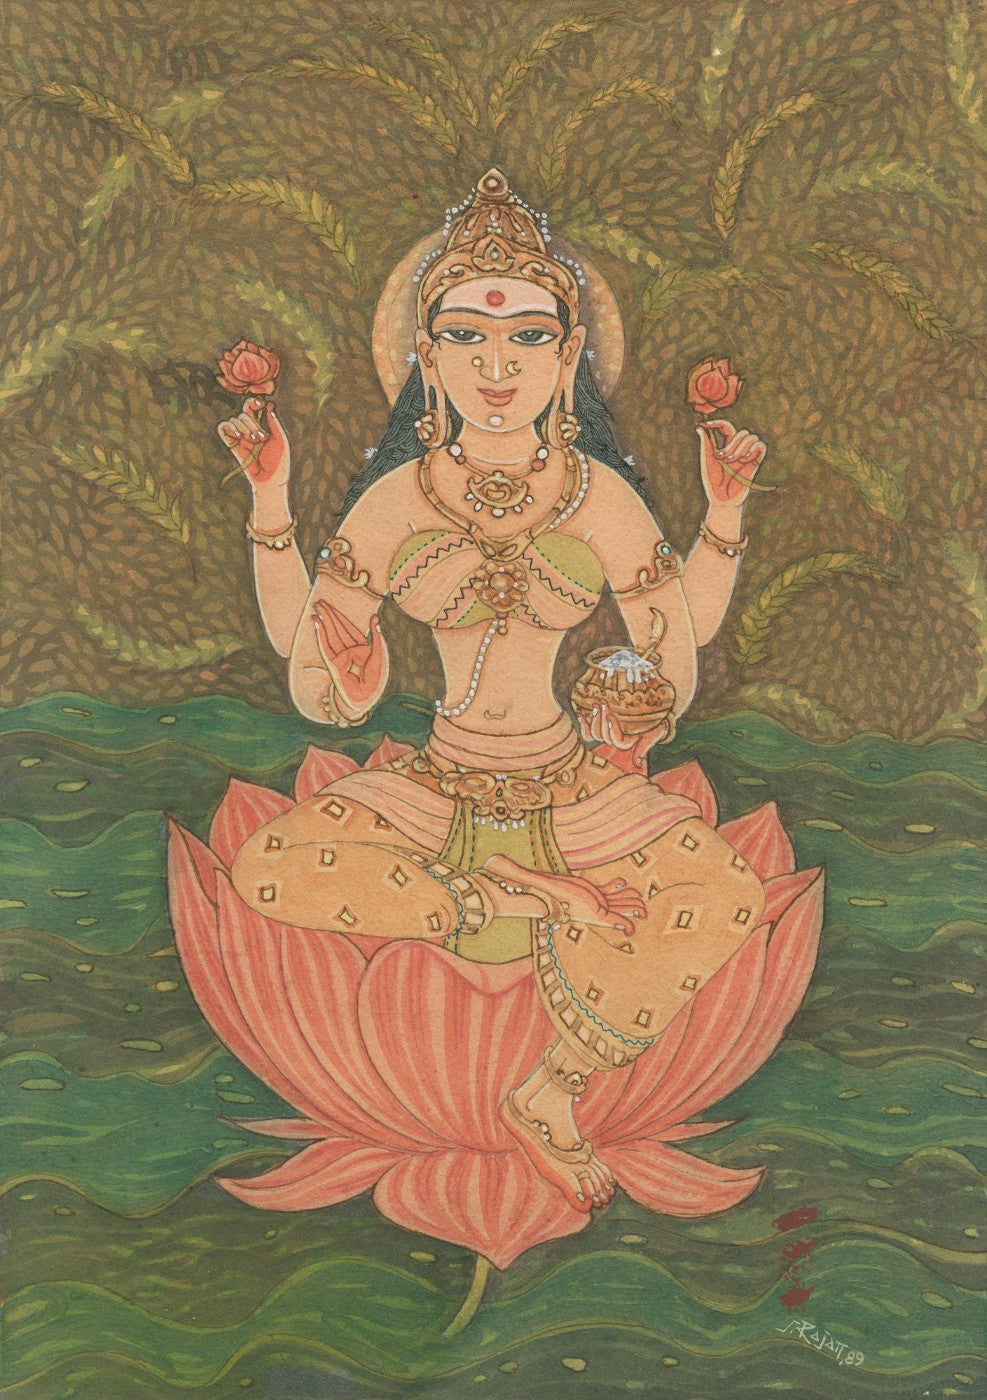 Indian Miniature Art - Annapoorna Devi - Posters by Kritanta Vala ...